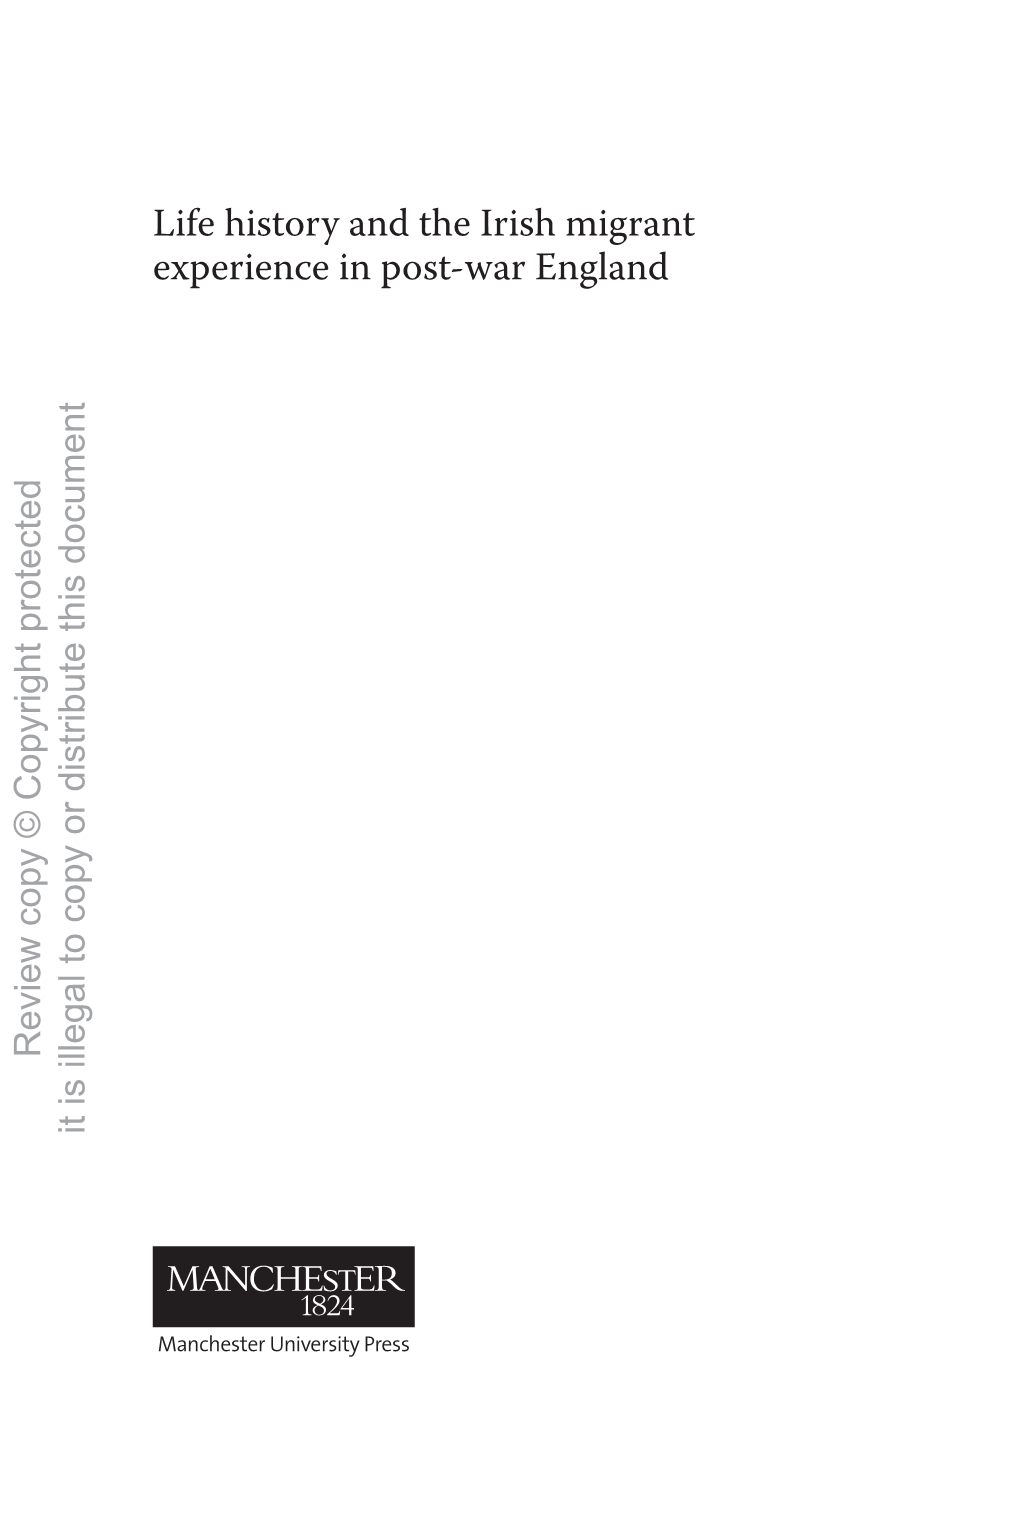 Life History and the Irish Migrant Experience in Post- War England